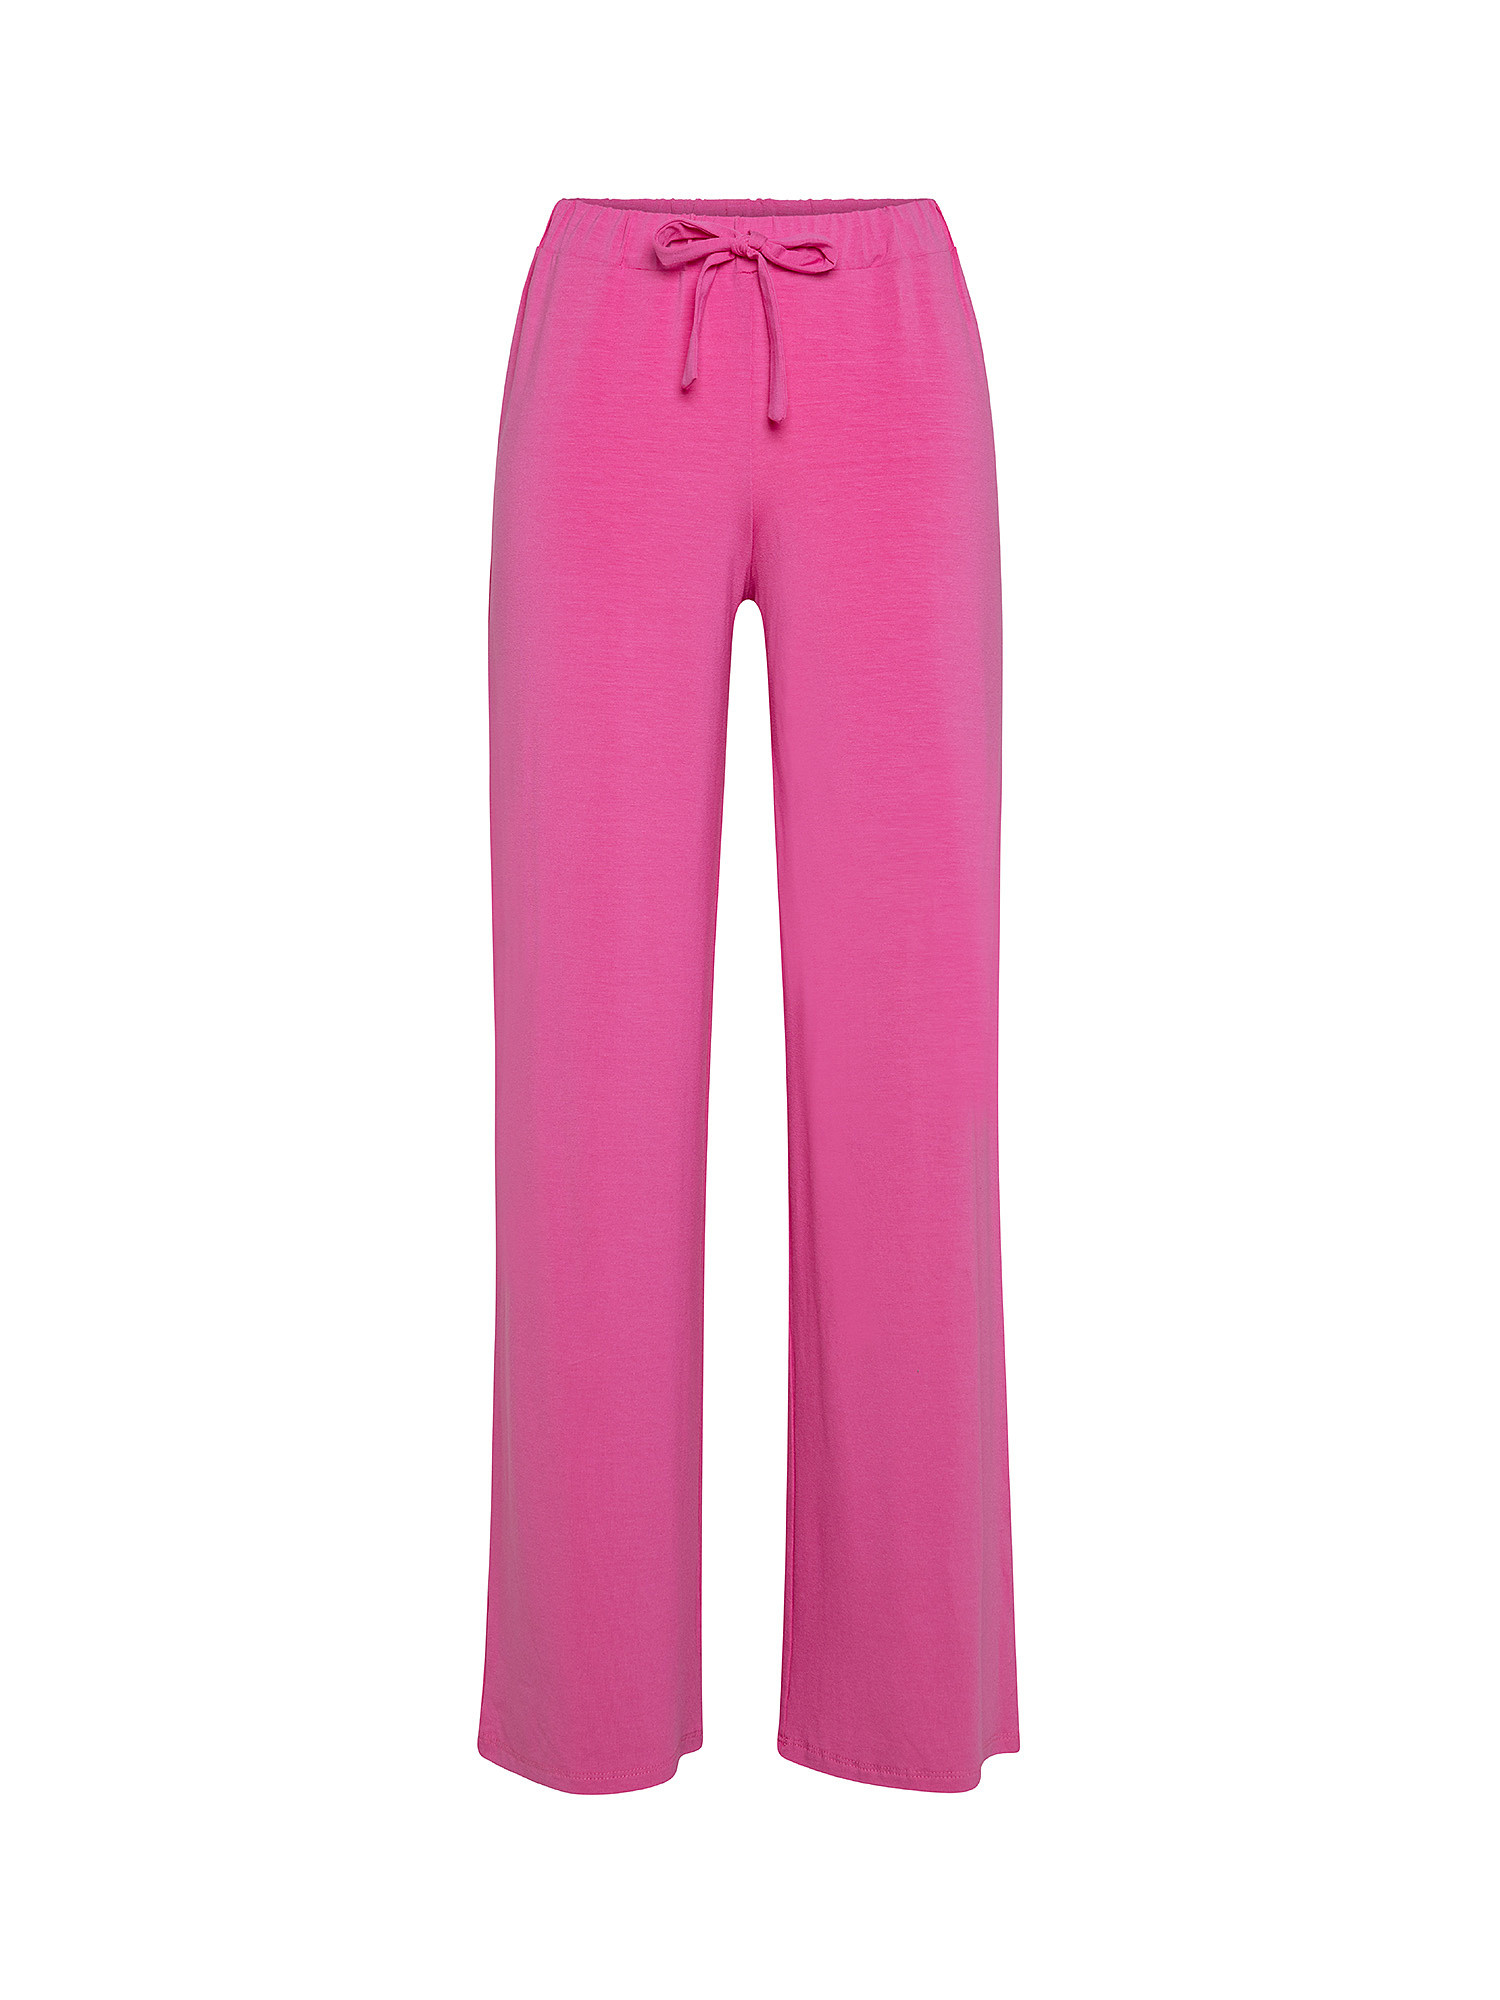 Wide leg trousers, Pink Fuchsia, large image number 0